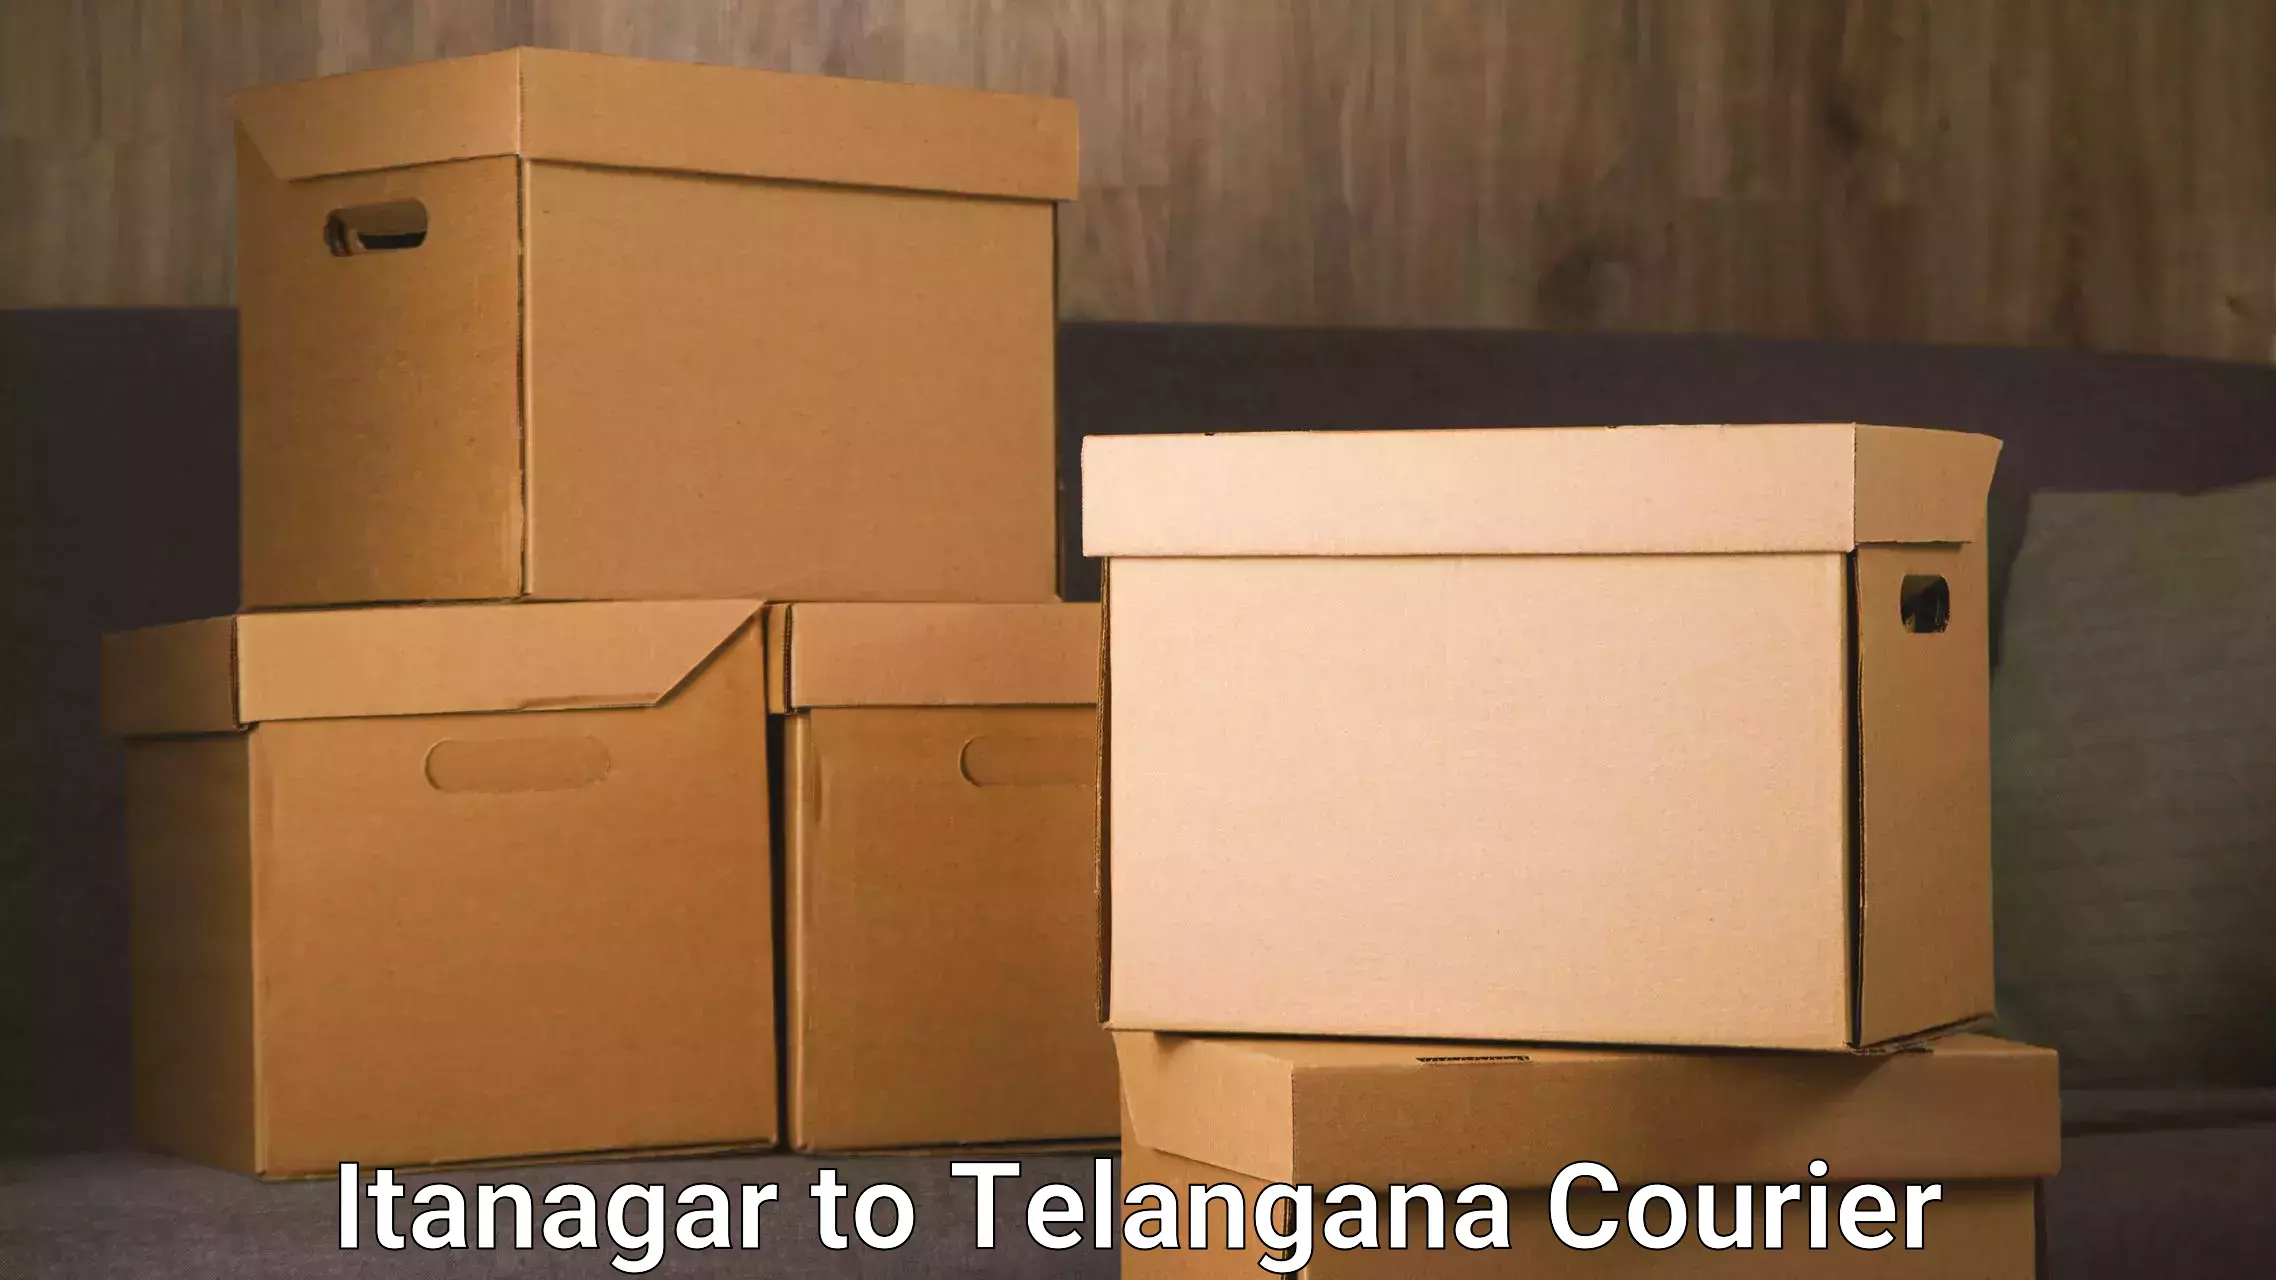 Reliable delivery network Itanagar to Telangana